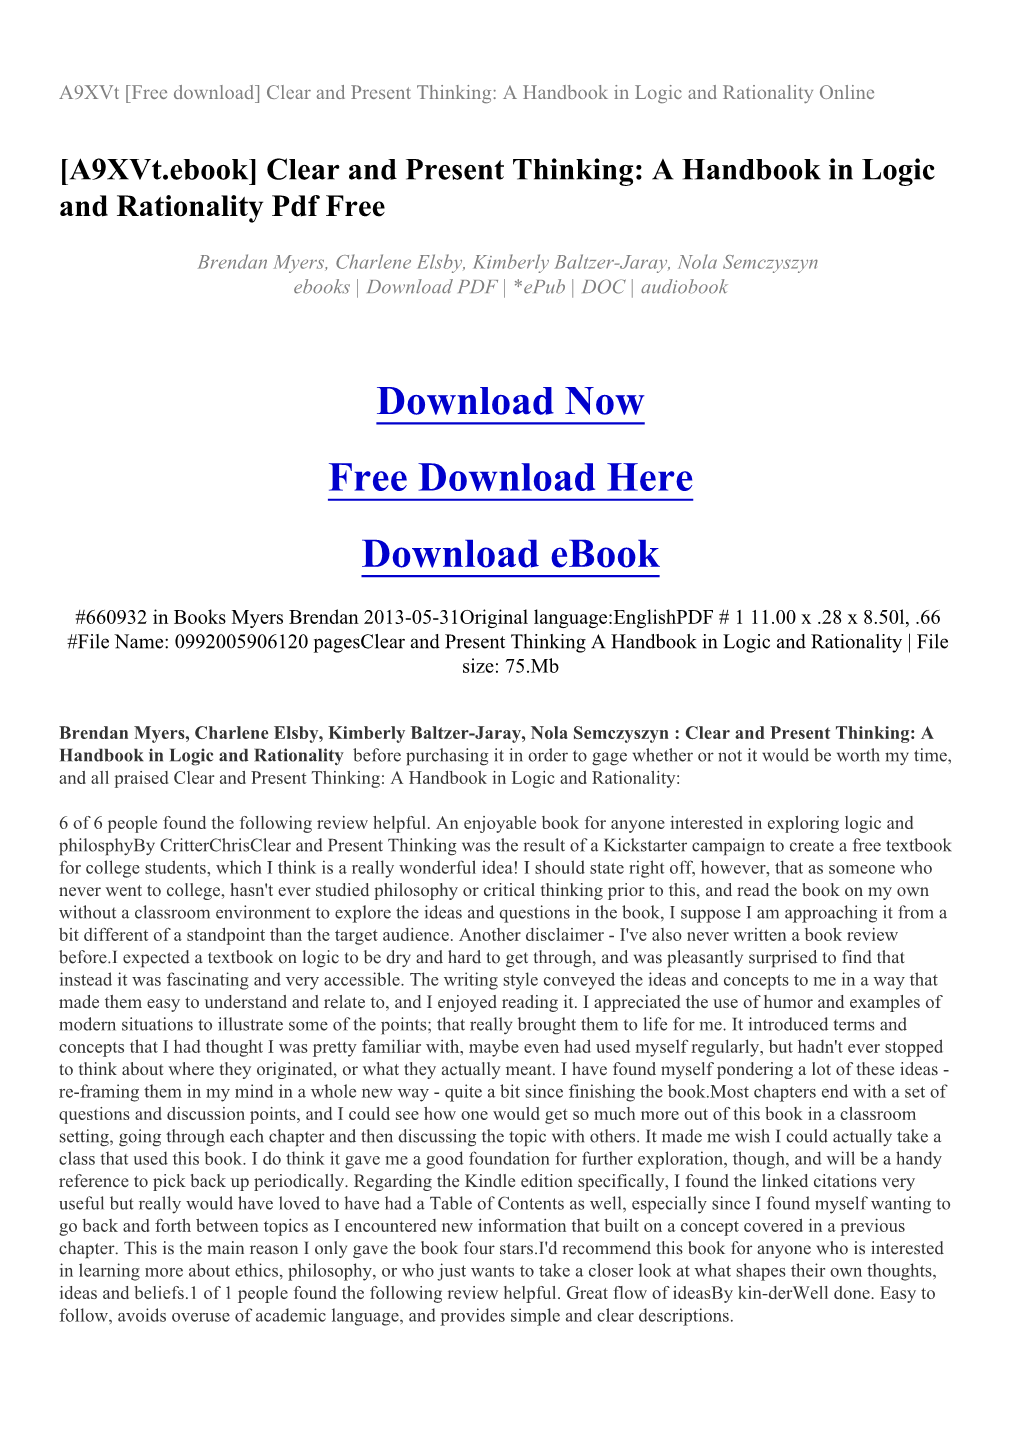 Clear and Present Thinking: a Handbook in Logic and Rationality Online